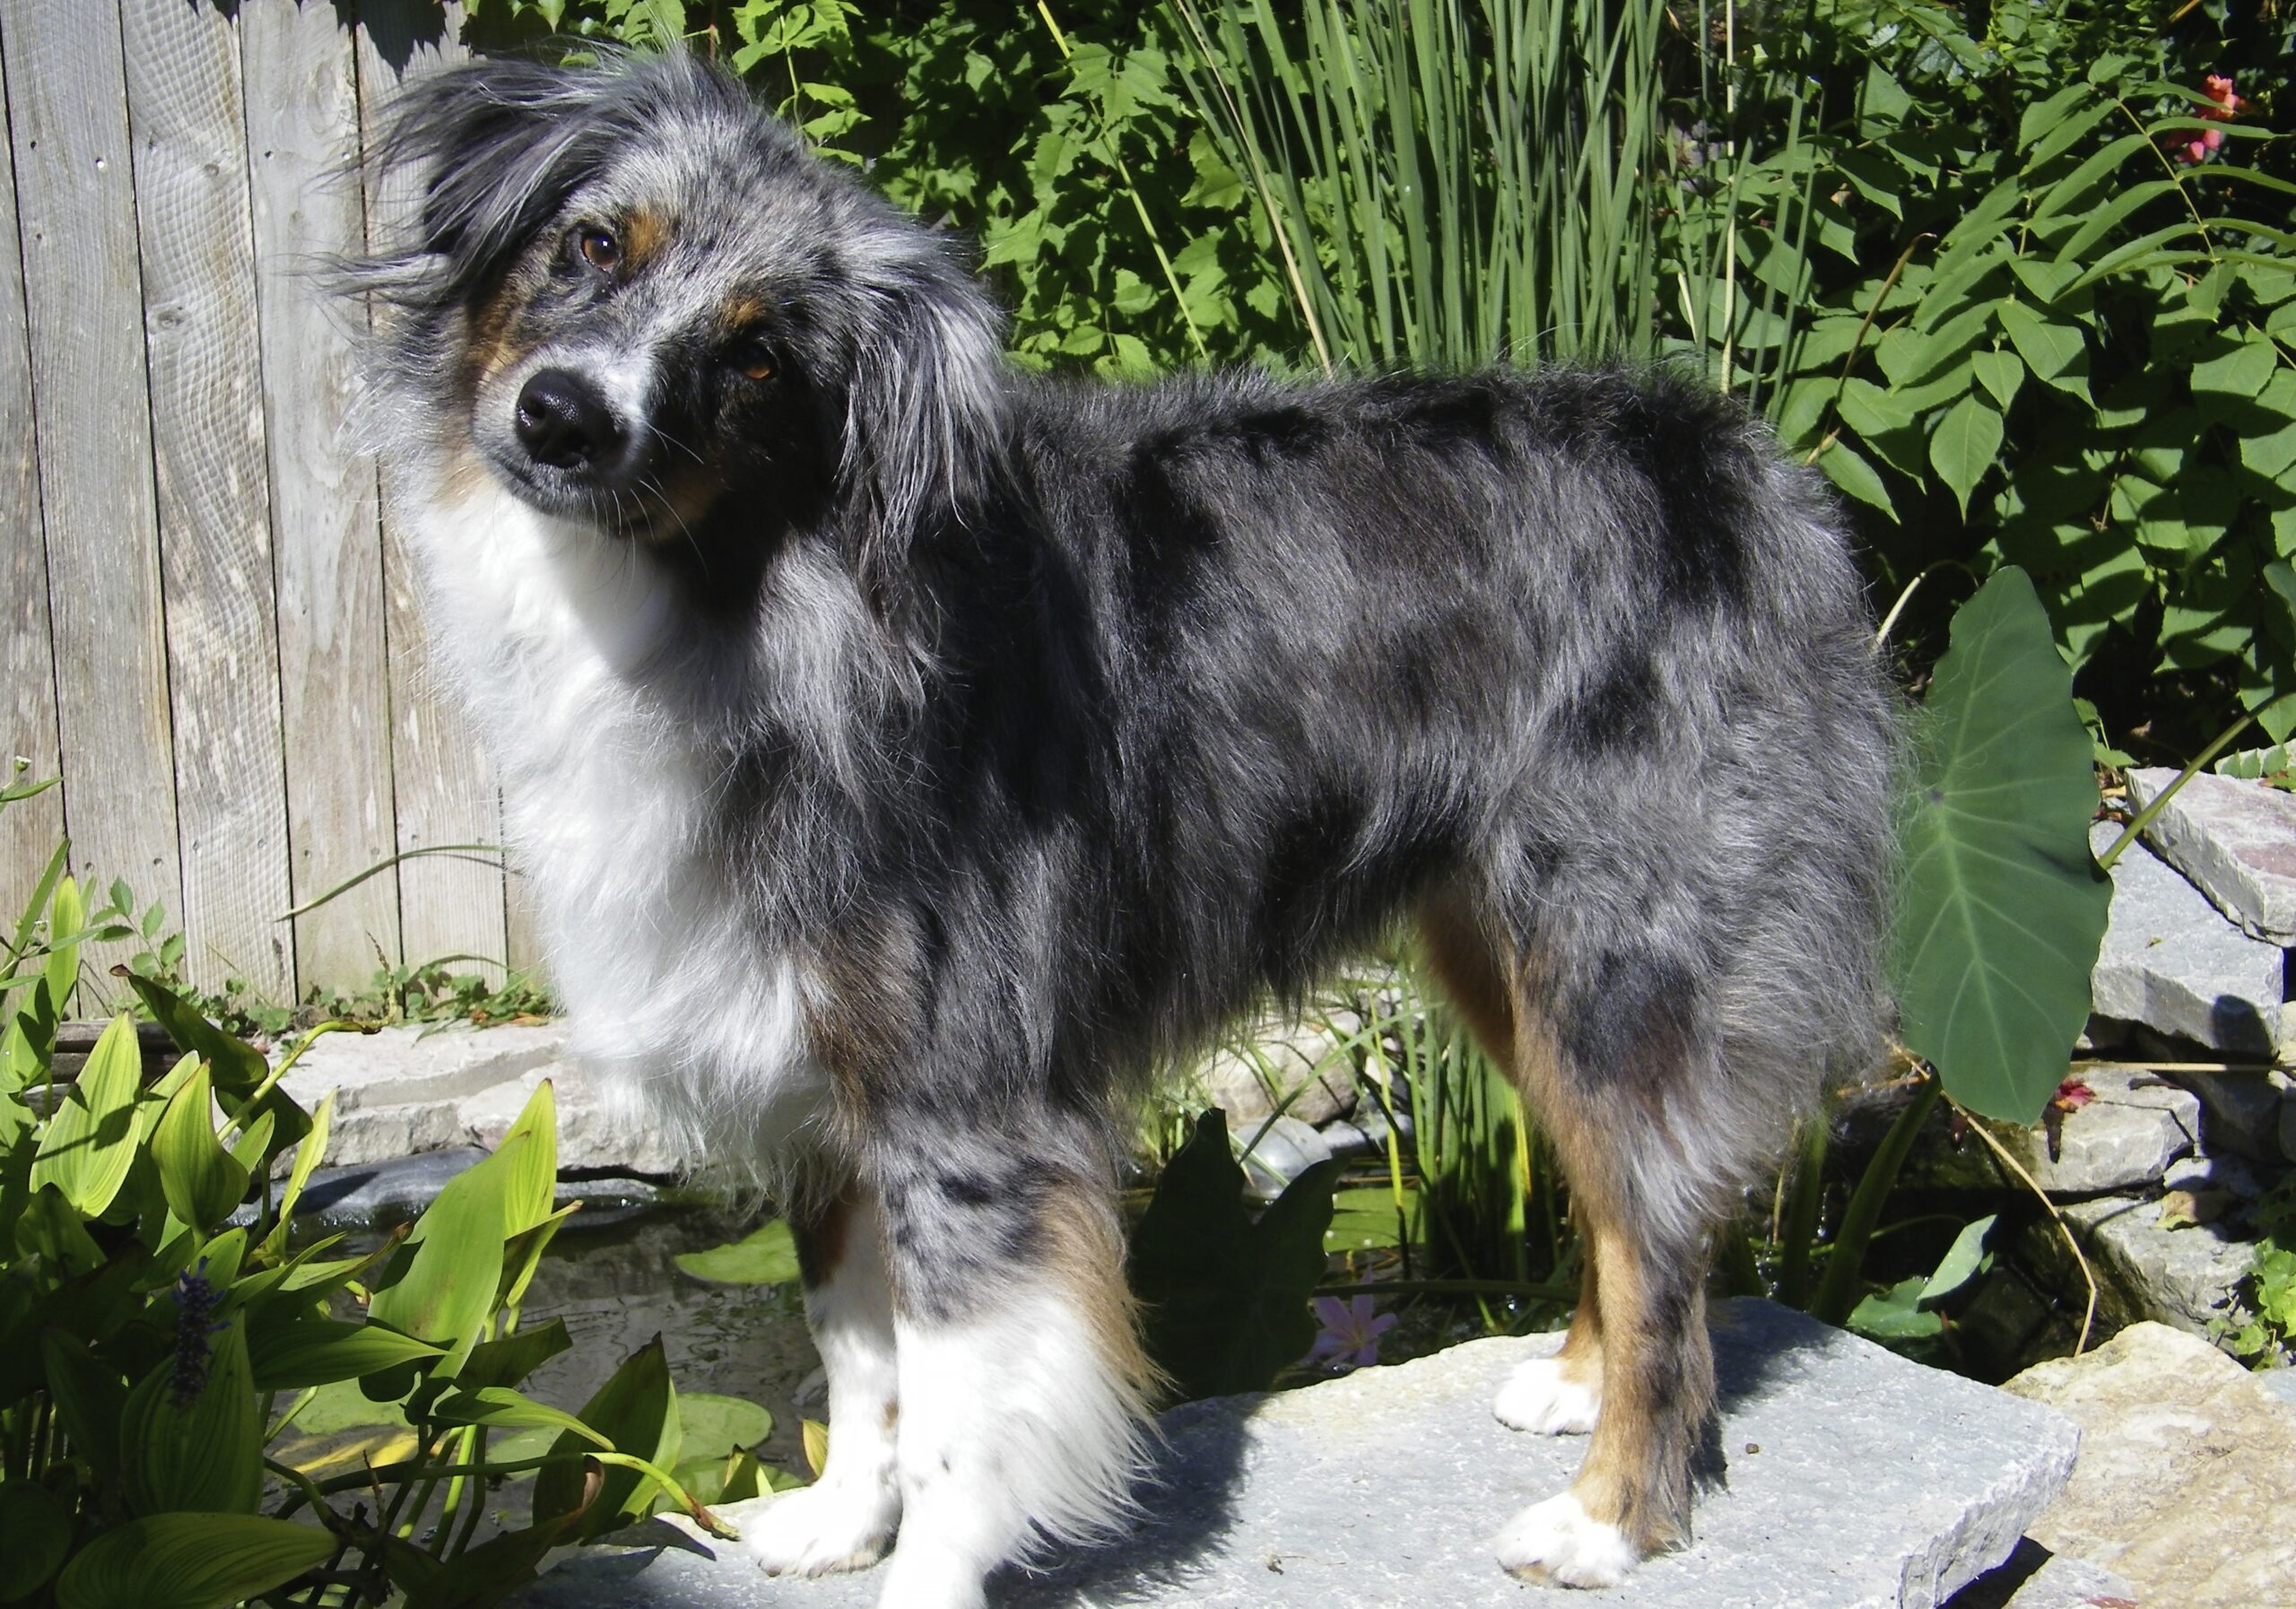 online courses image is of a blue merle Australian shepherd standing on a rock with greenery and a fence in back ground.